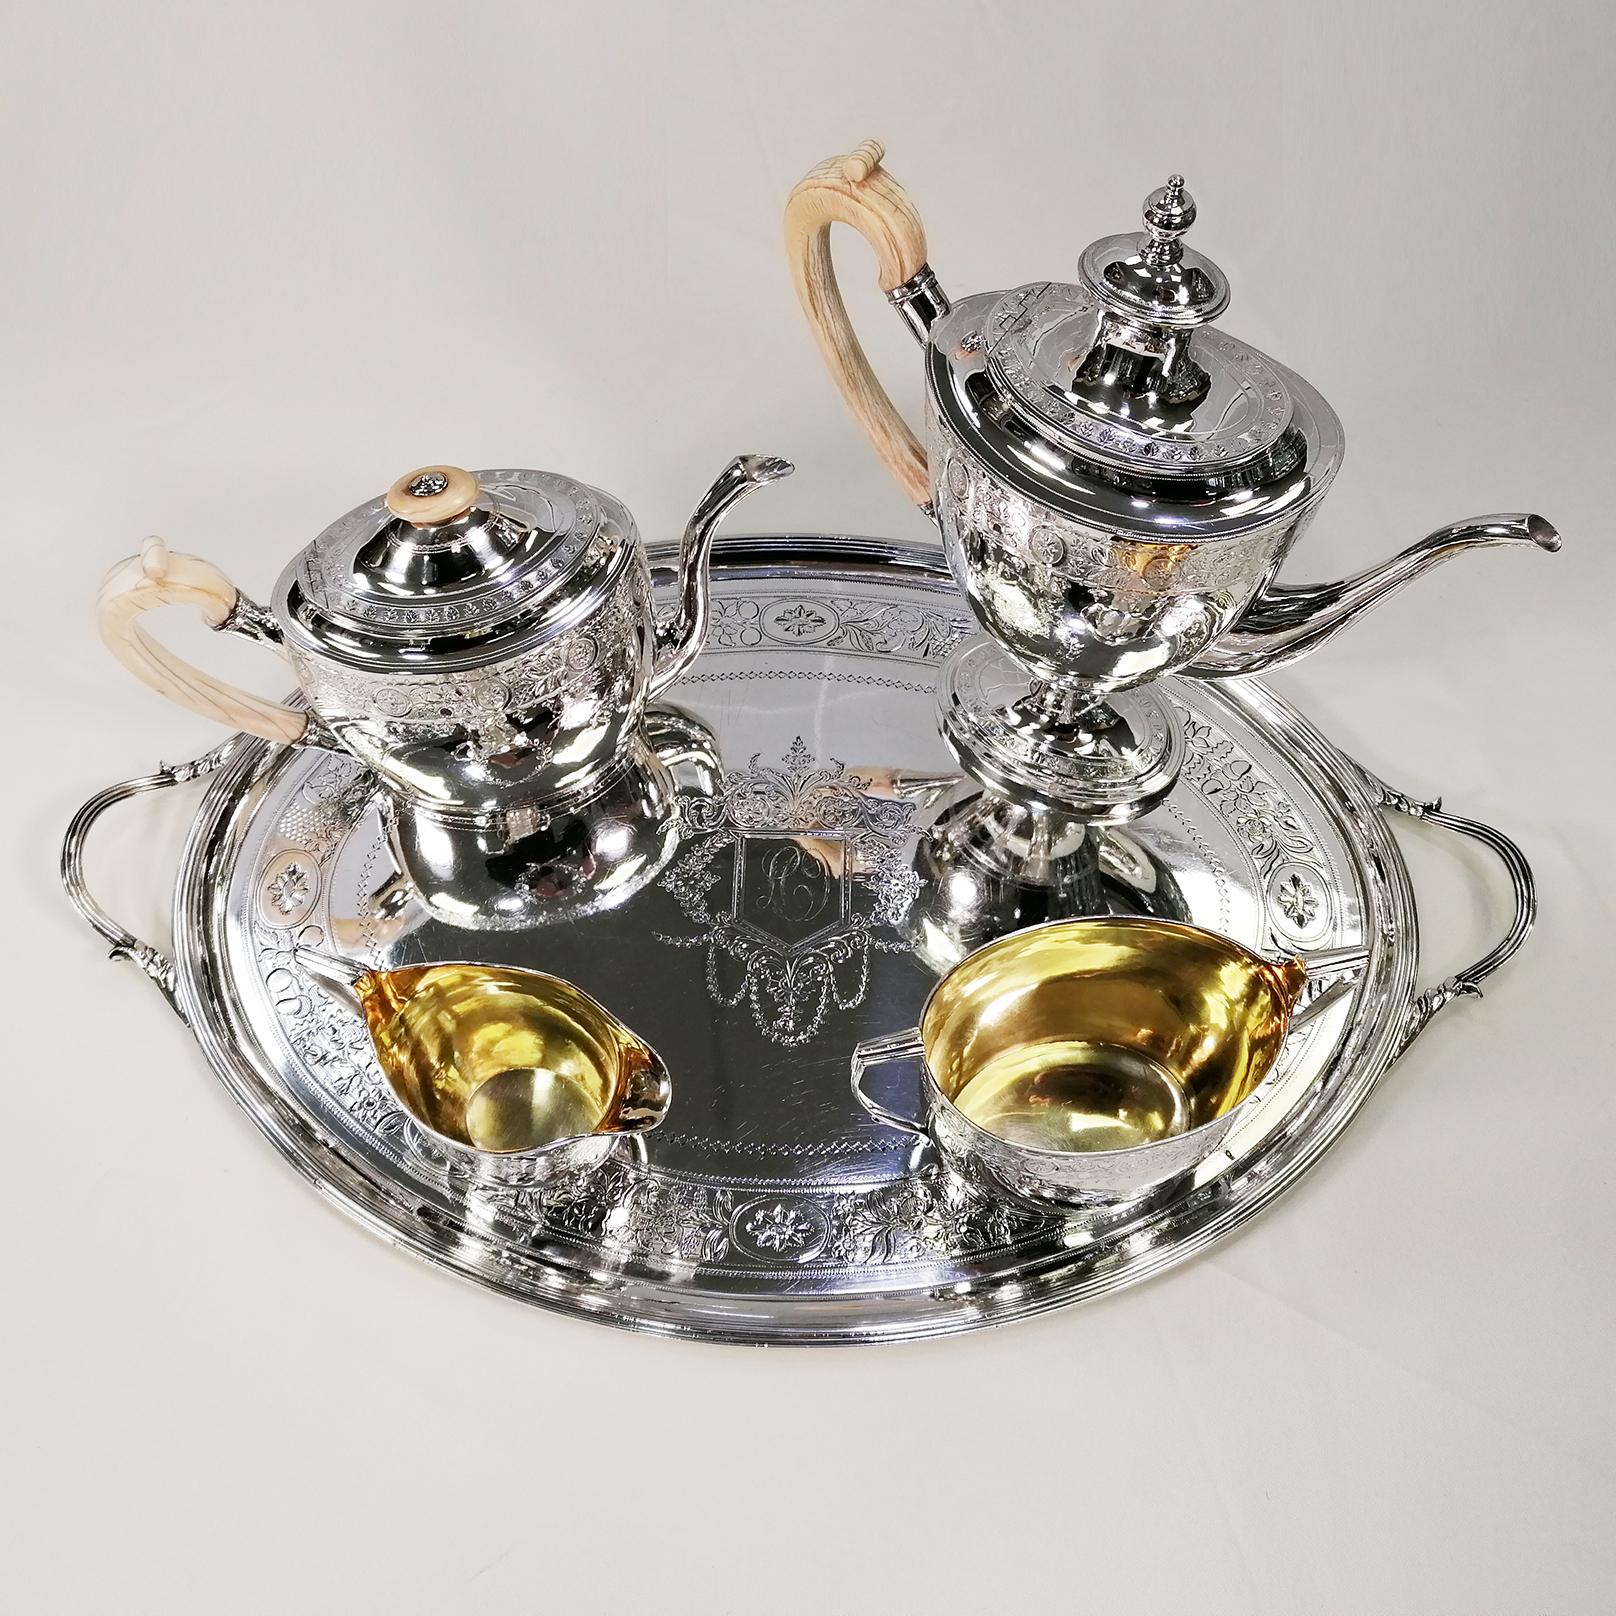 English Antique George III Sterling Silver Tea-Coffeeset ivory Handles & Tray 1798-1800 For Sale